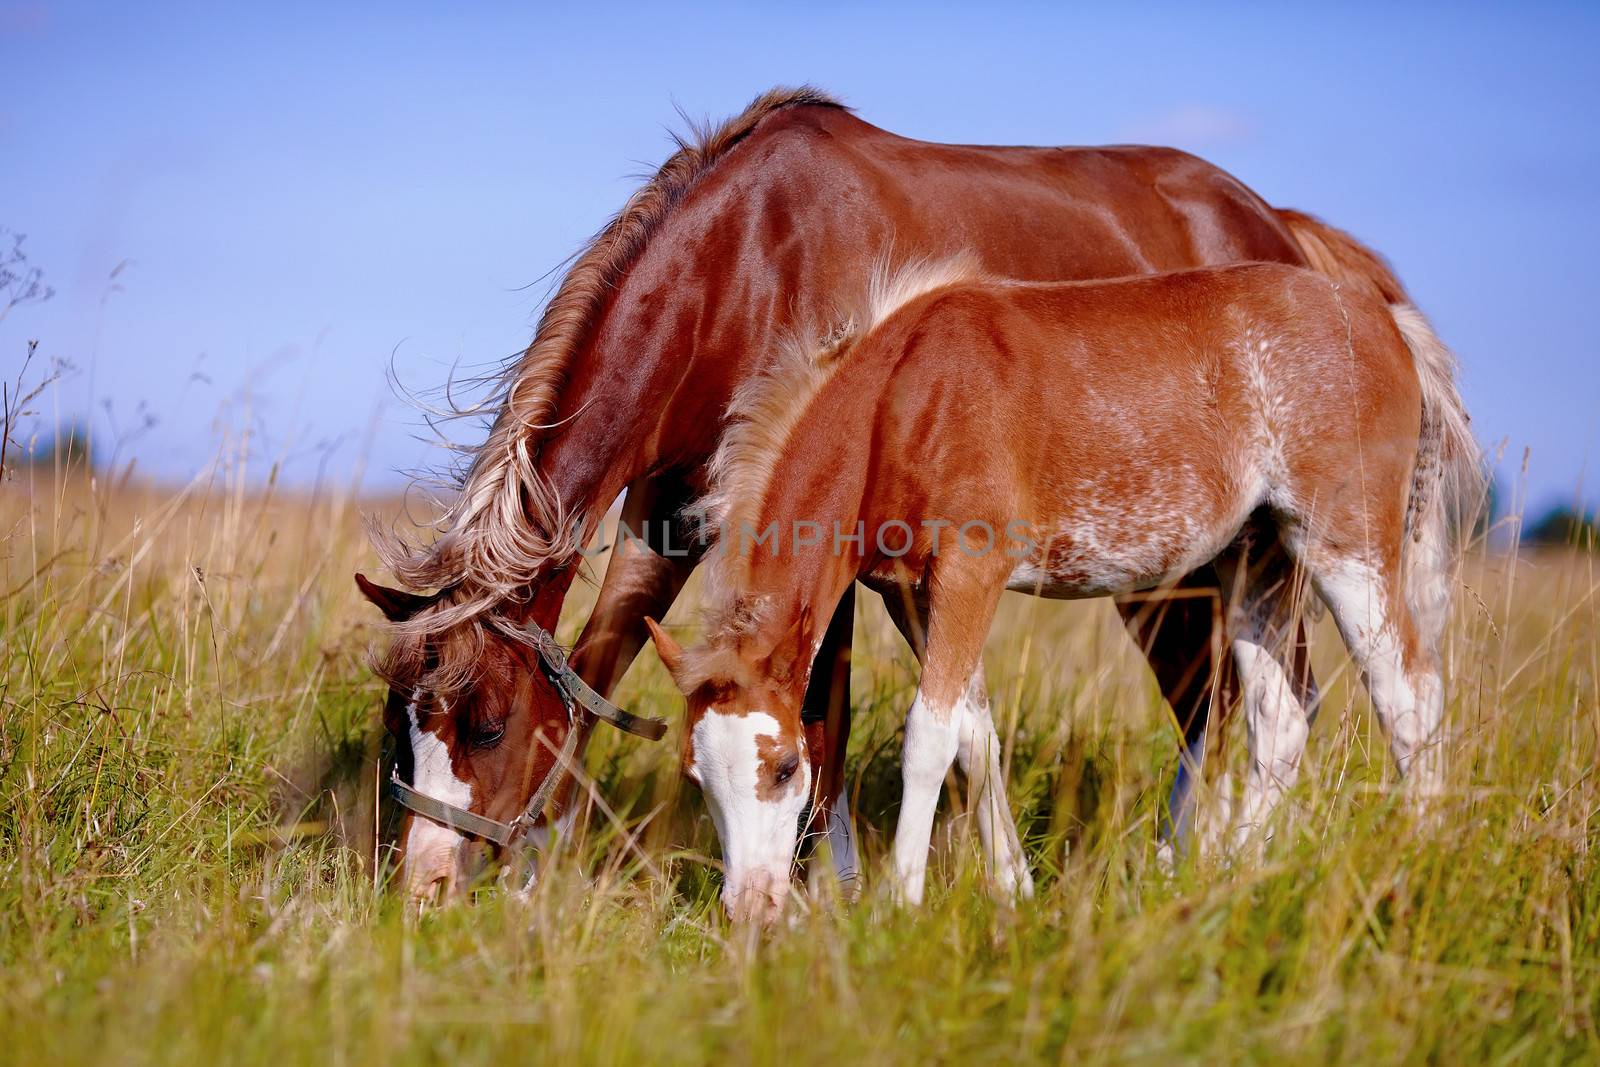 Red horses. The horses is grazed. Horses on a pasture. The horses eats a grass. Mare with a foal on a meadow.